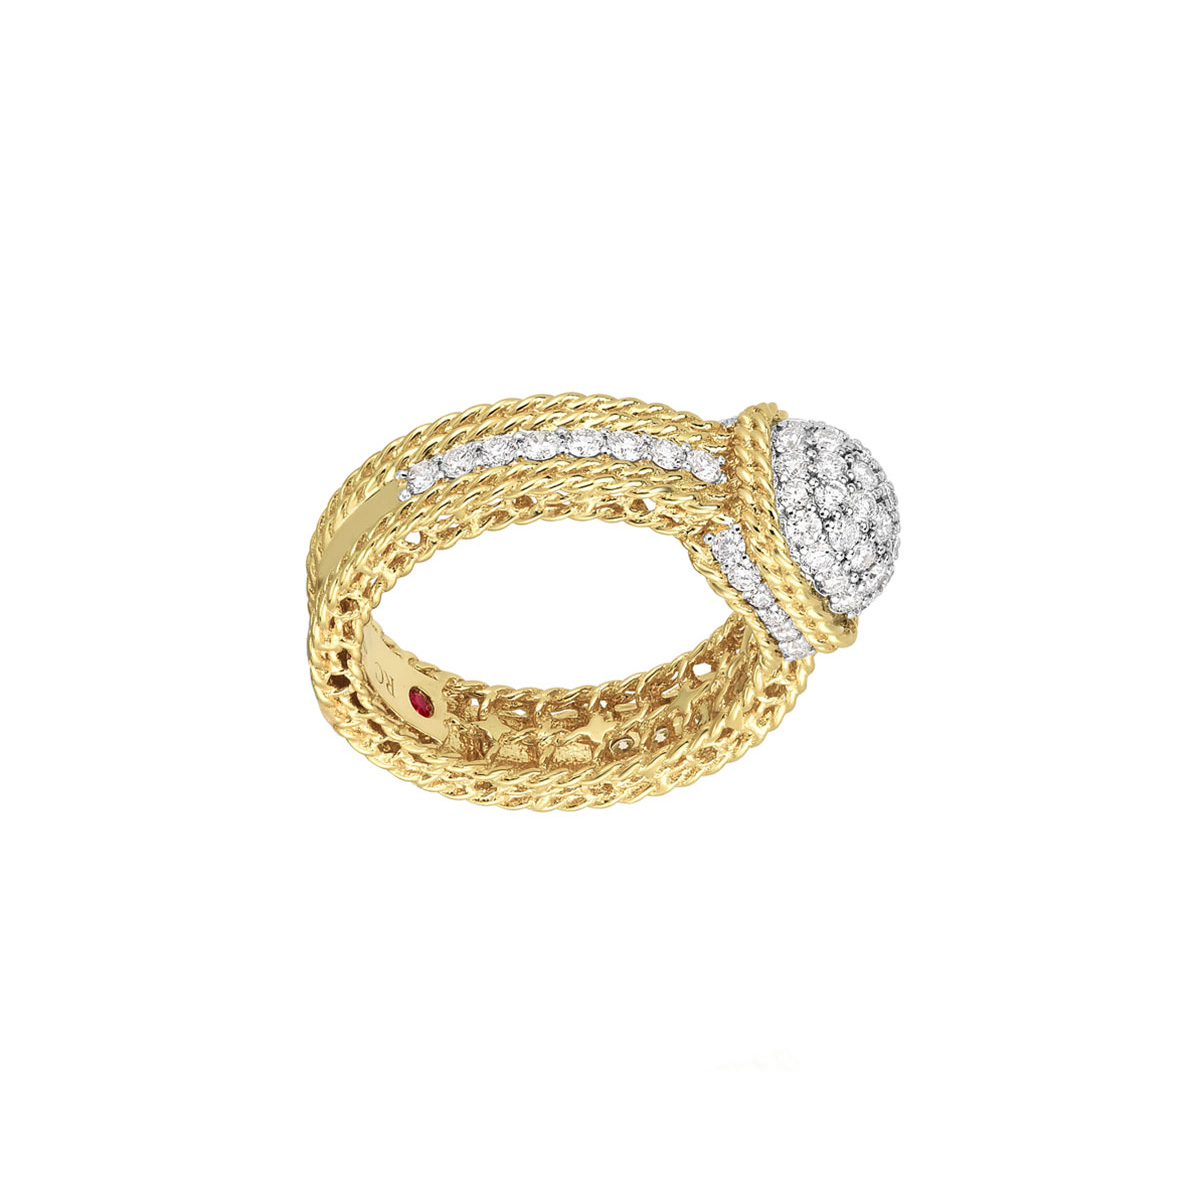 Wholesale Custom OEM/ODM Jewelry CZ Ring in 18K Yellow Gold or plated silver OEM jewelry supplier